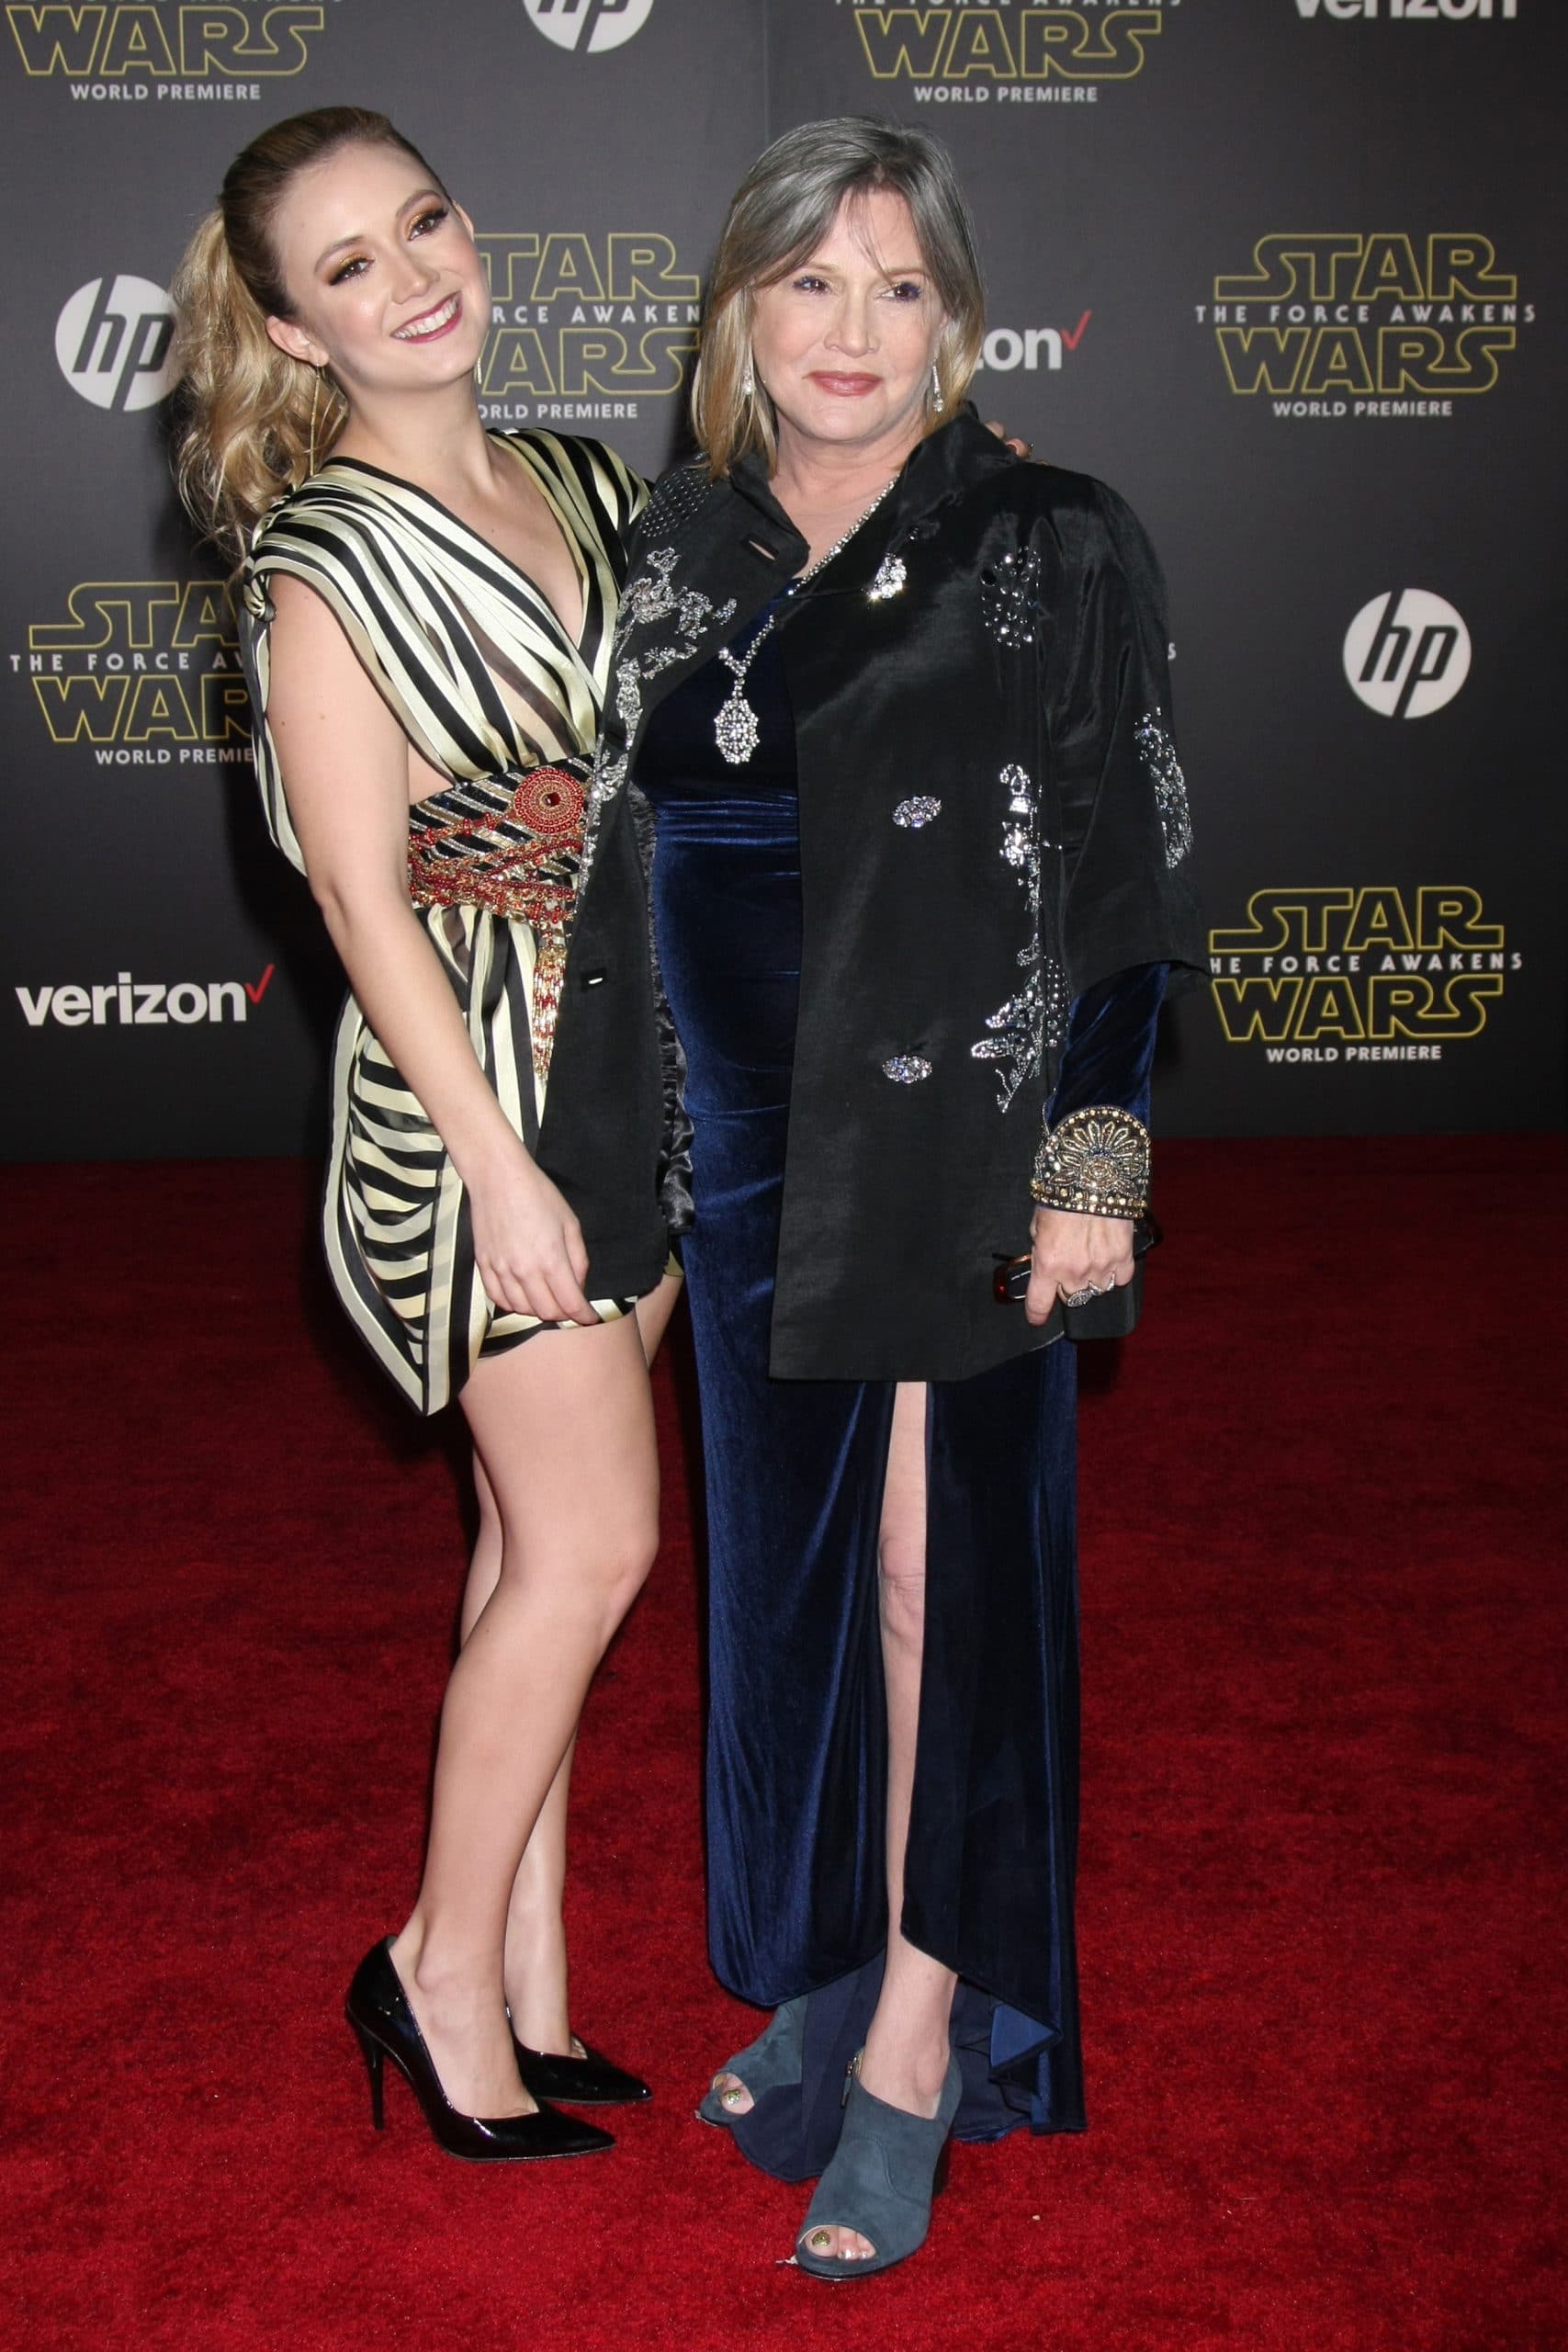 Billie Lourd, Carrie Fisher at the Star Wars: The Force Awakens World Premiere